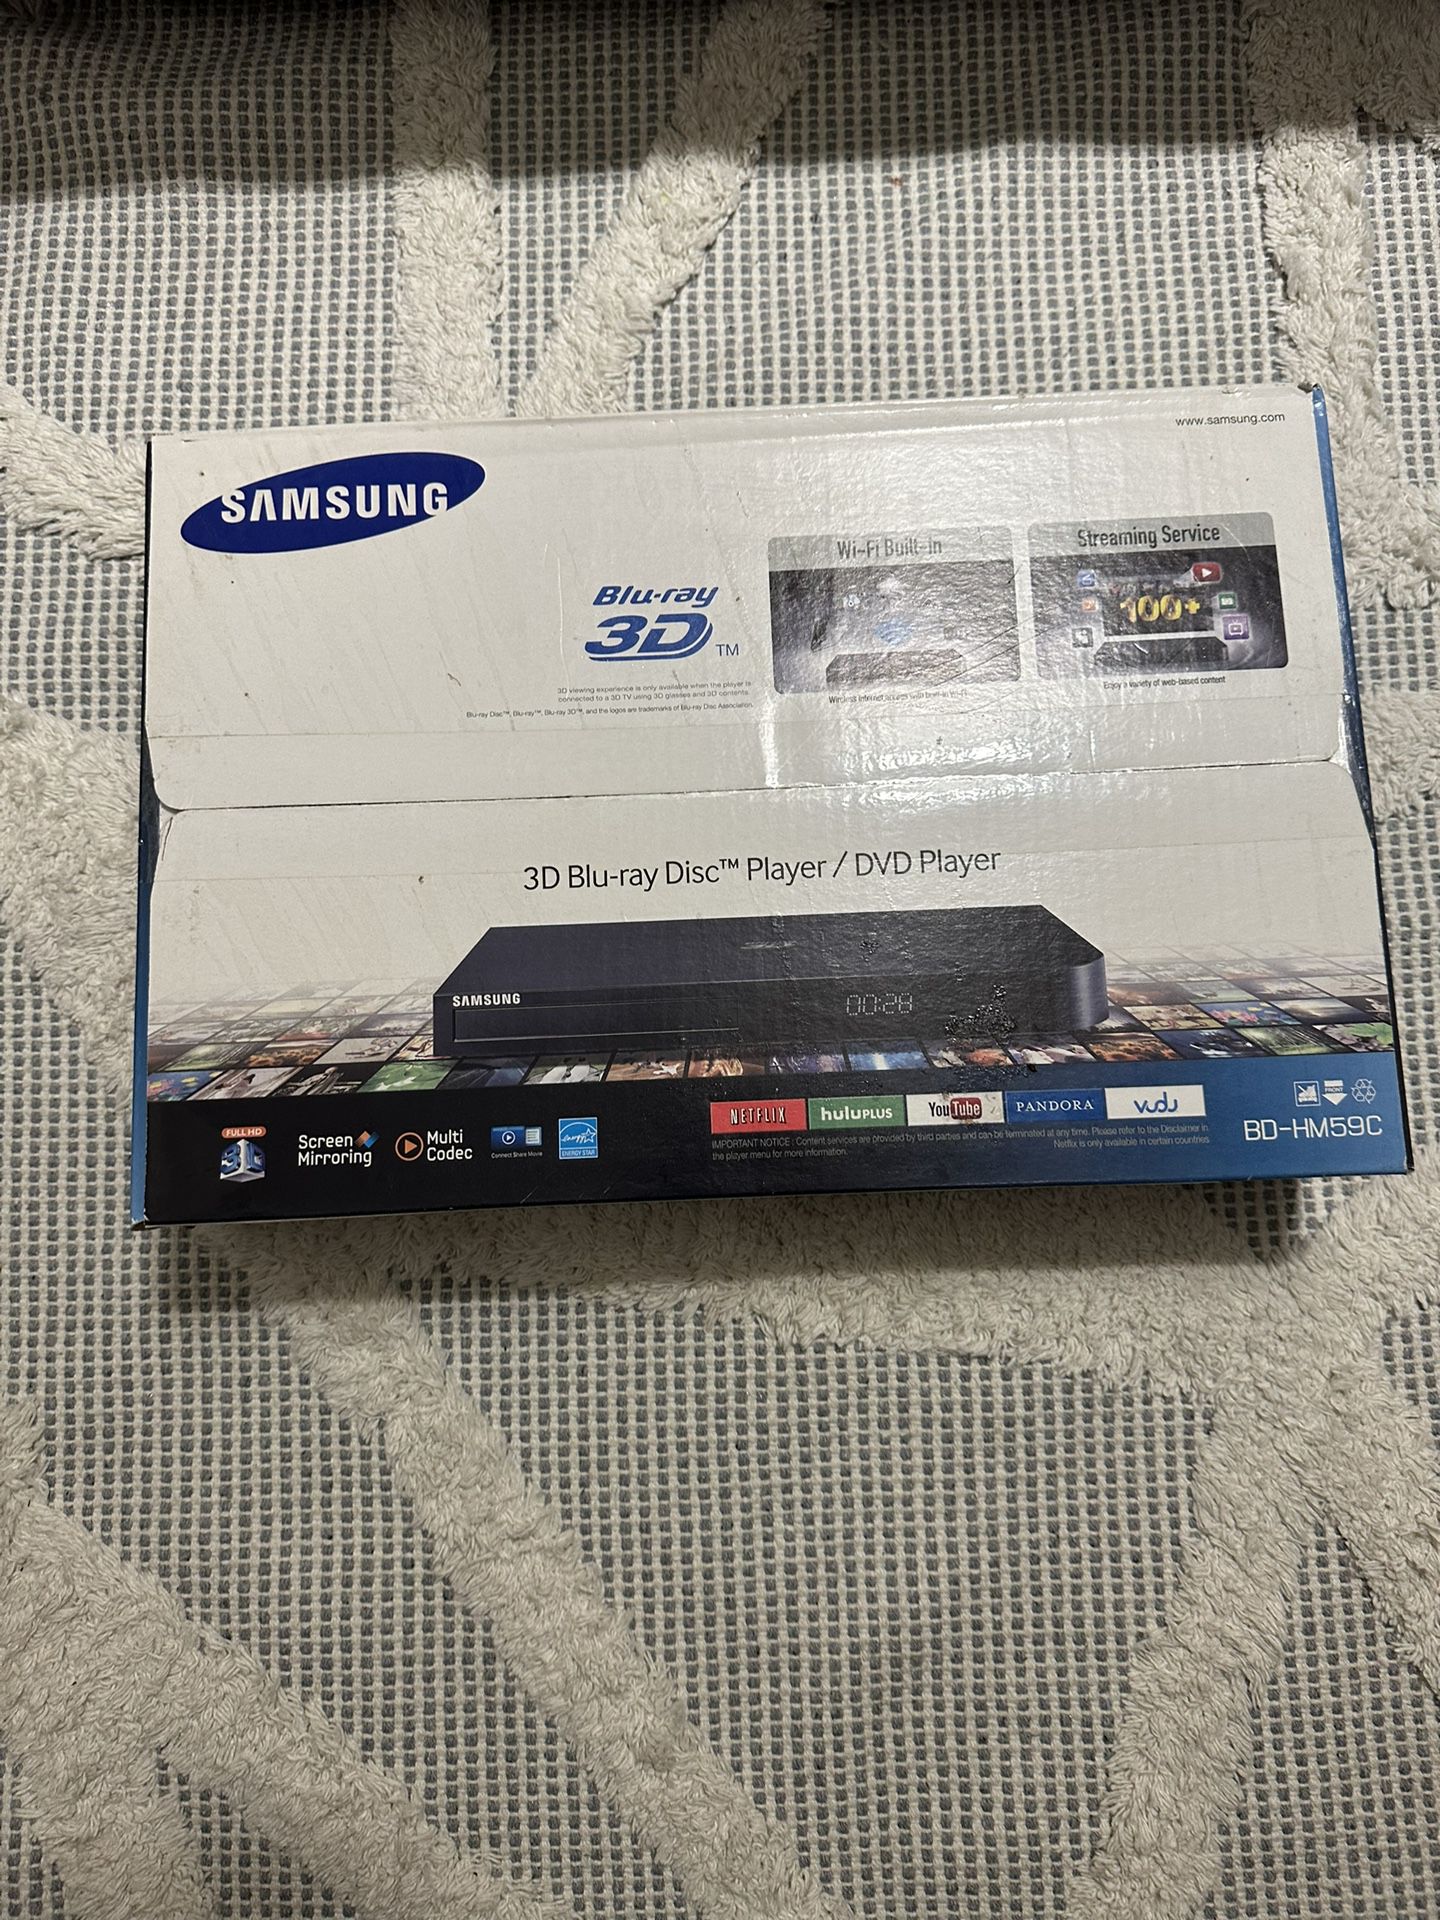 Samsung Blue Ray 3D DVD Player Build In WiFi for Sale in Portland